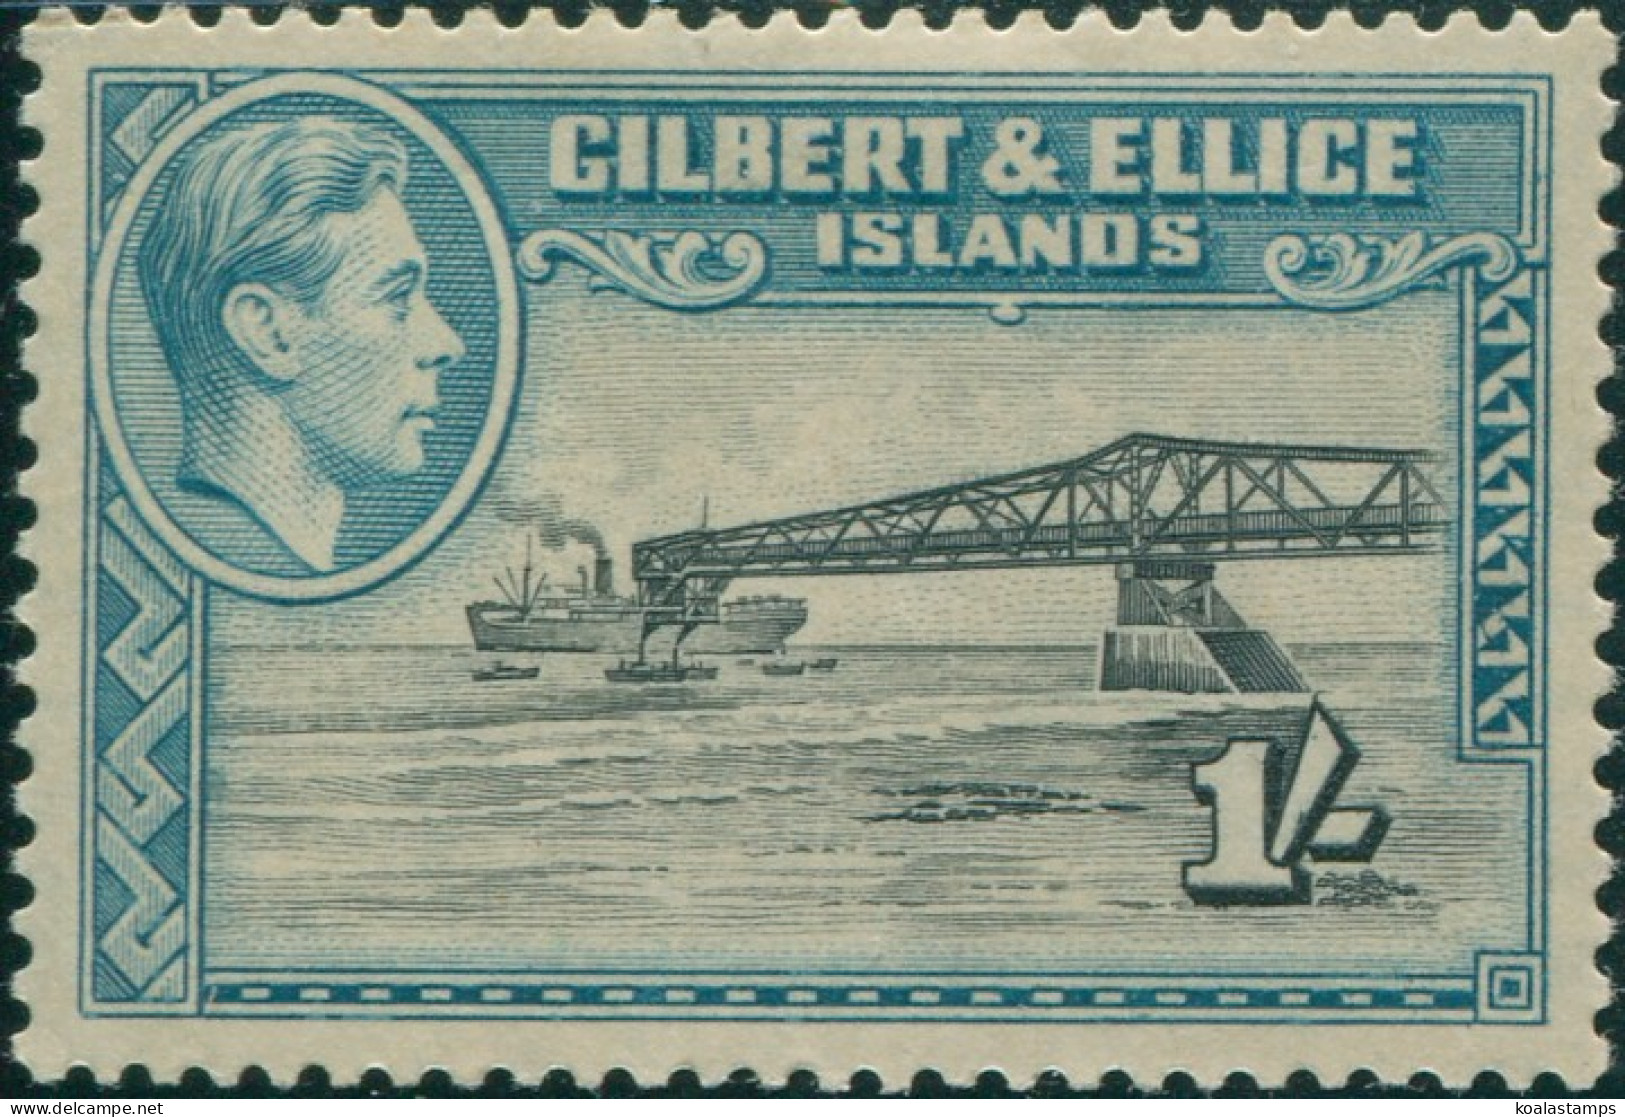 Gilbert & Ellice Islands 1939 SG51a 1/- Cantilever Jetty KGVI P12 MLH - Isole Gilbert Ed Ellice (...-1979)